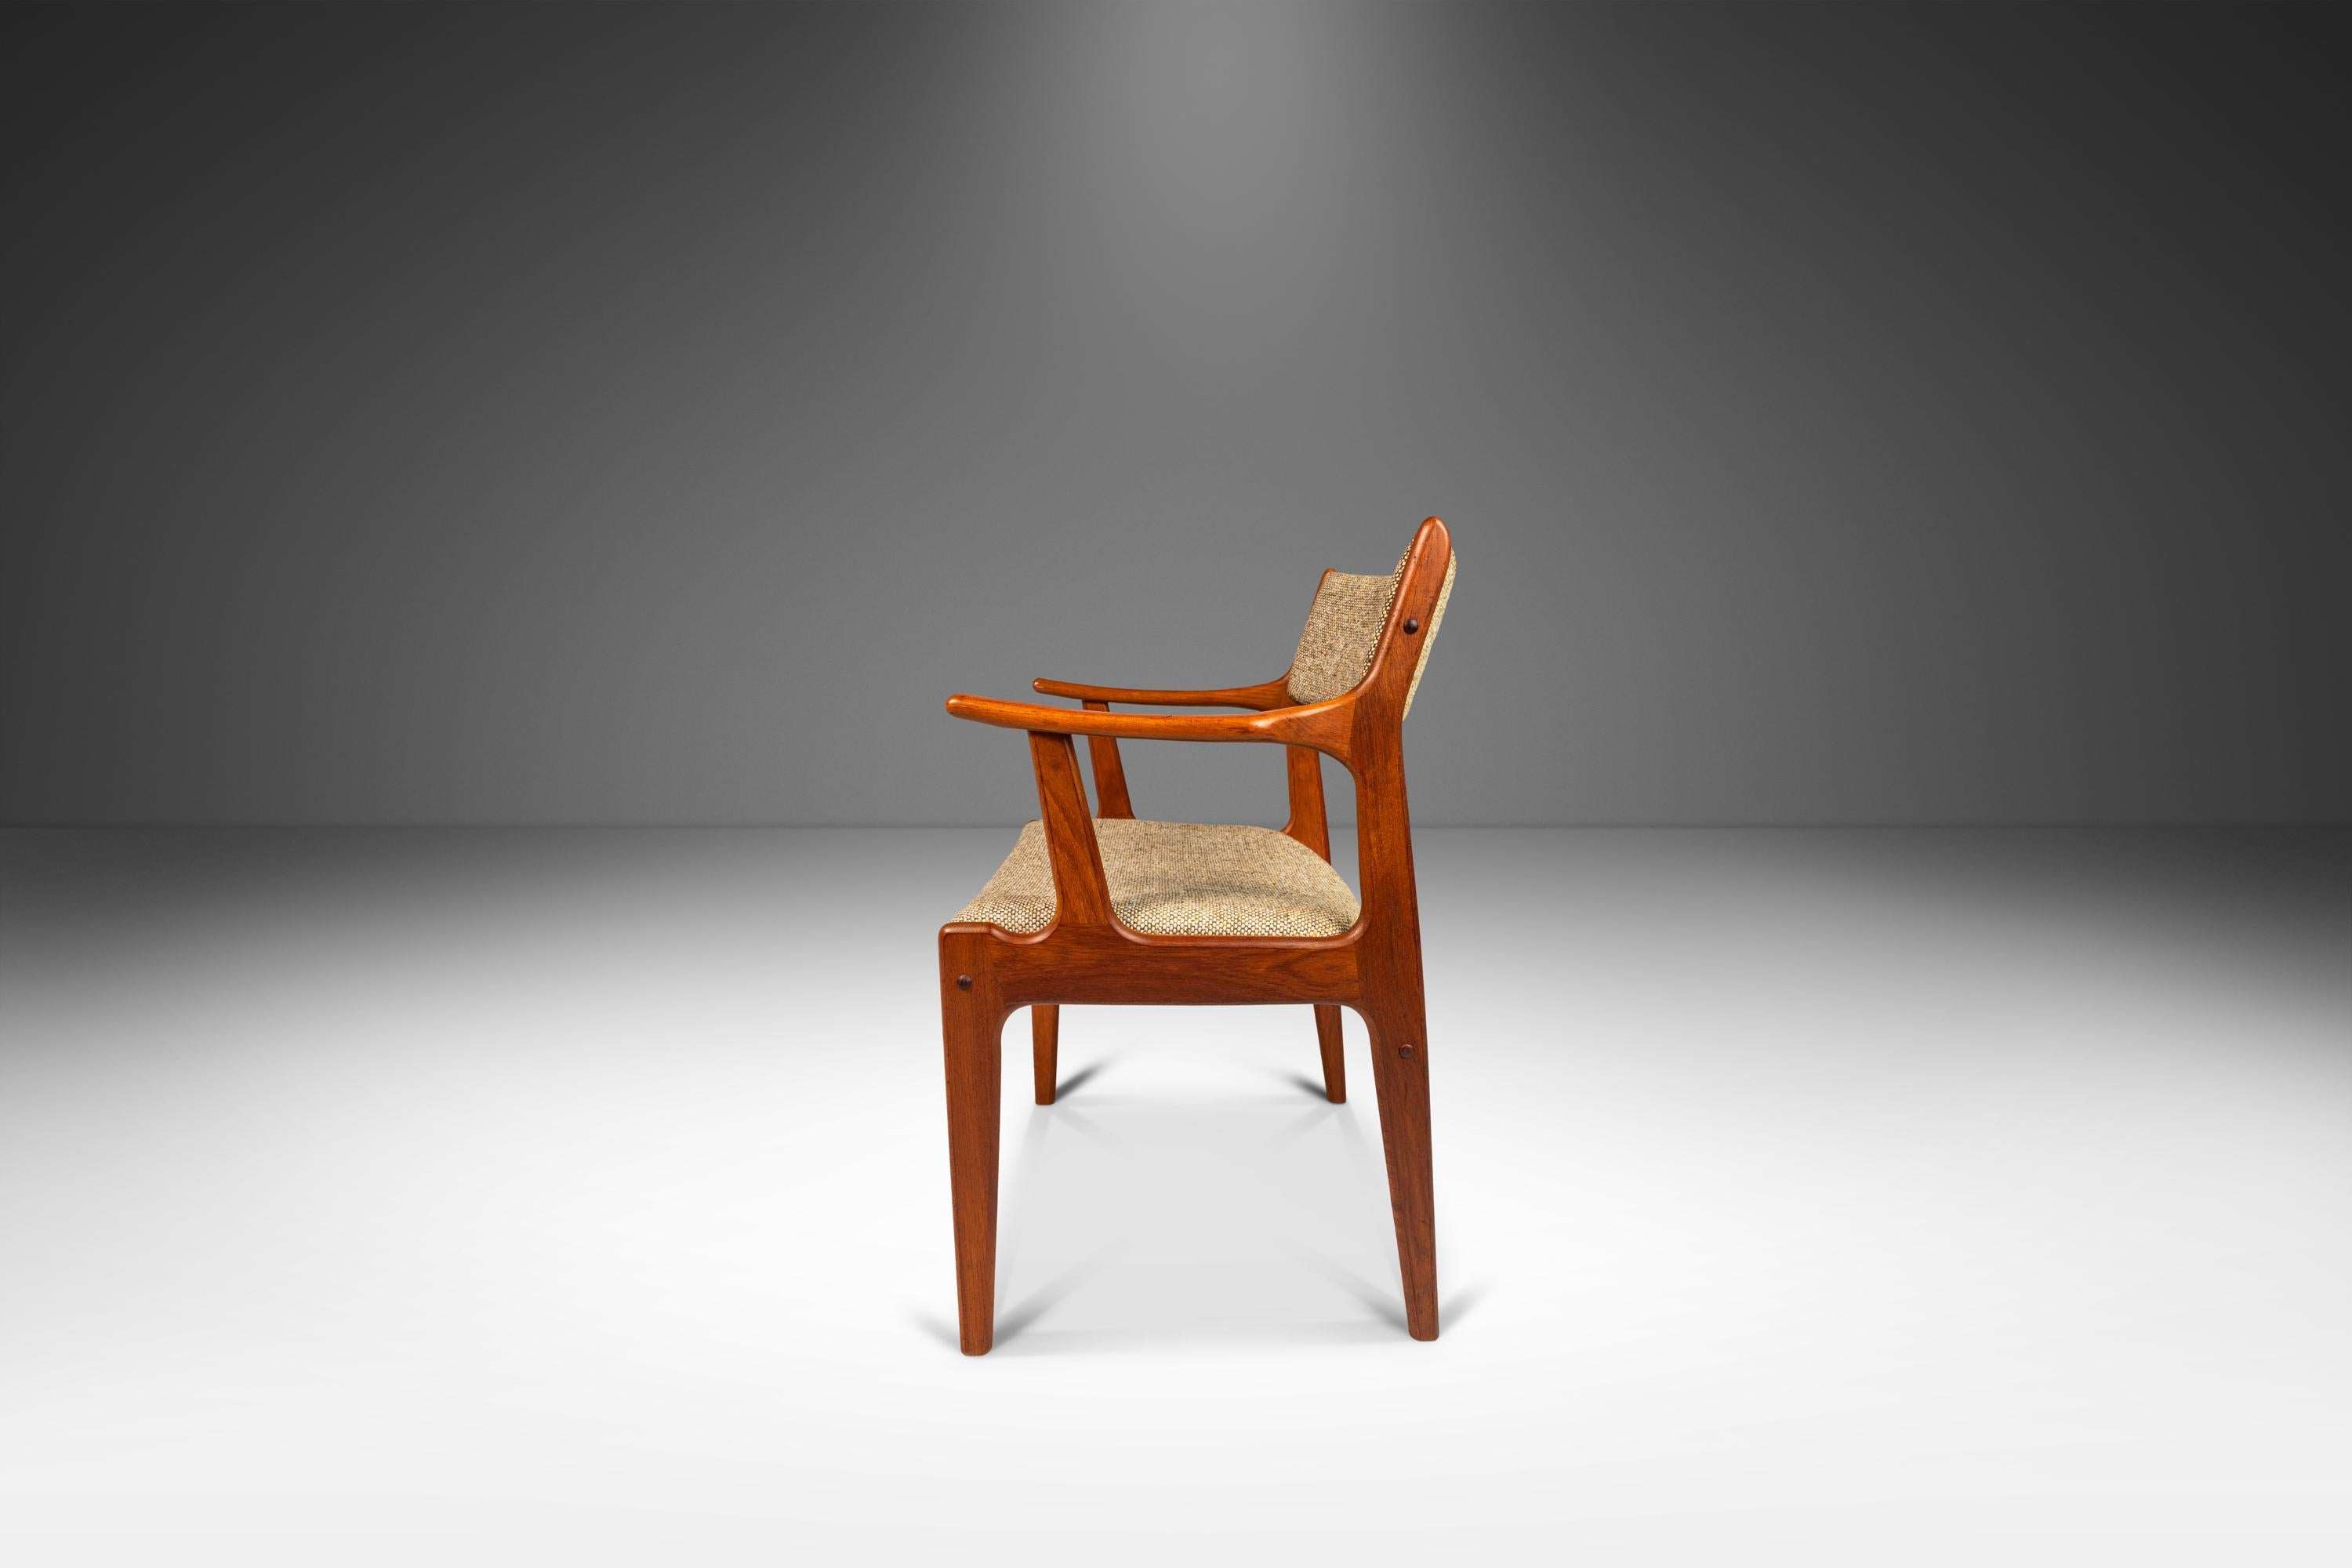 Introducing an elegant arm chair by D-SCAN made in the mid-1970's. In 100% original vintage condition this chair features graceful armrests, intricate finger joinery and exceptional solid Burmese teak woodgrains that are absolutely mesmerizing in